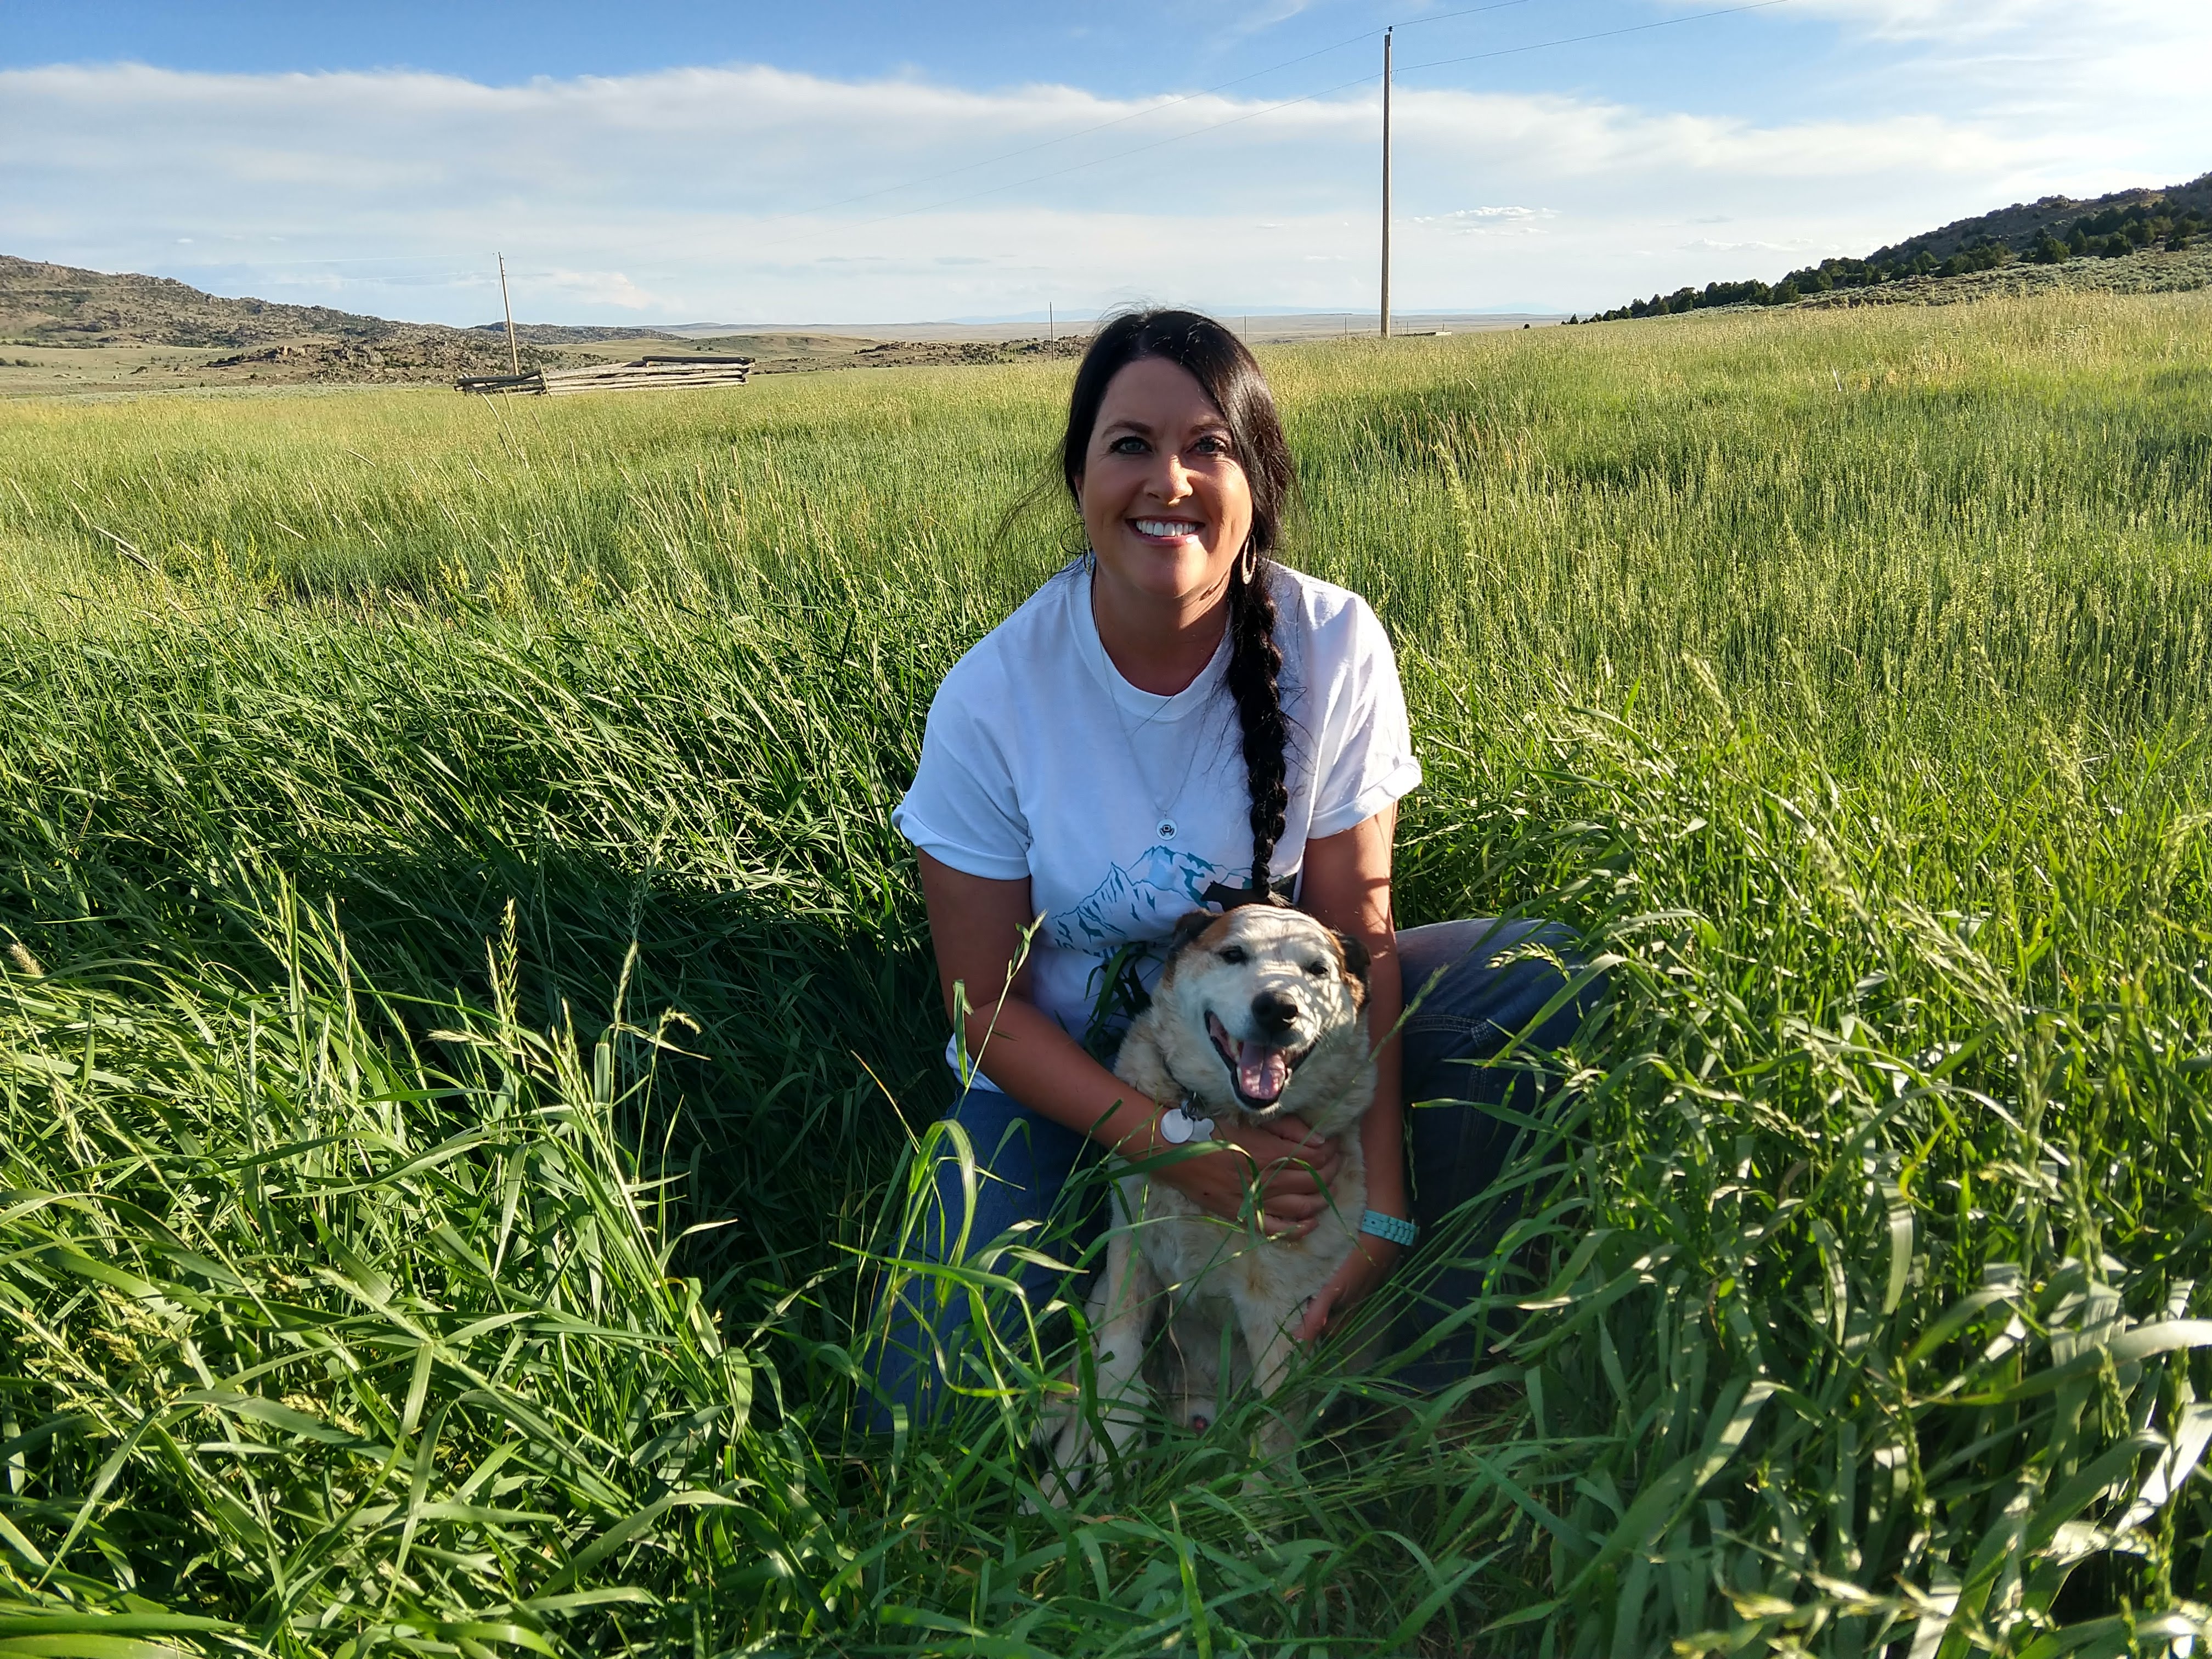 Kacey Atkinson smiling in field with dog, one of the speakers for women in agrictulure conference - held at Purdue University